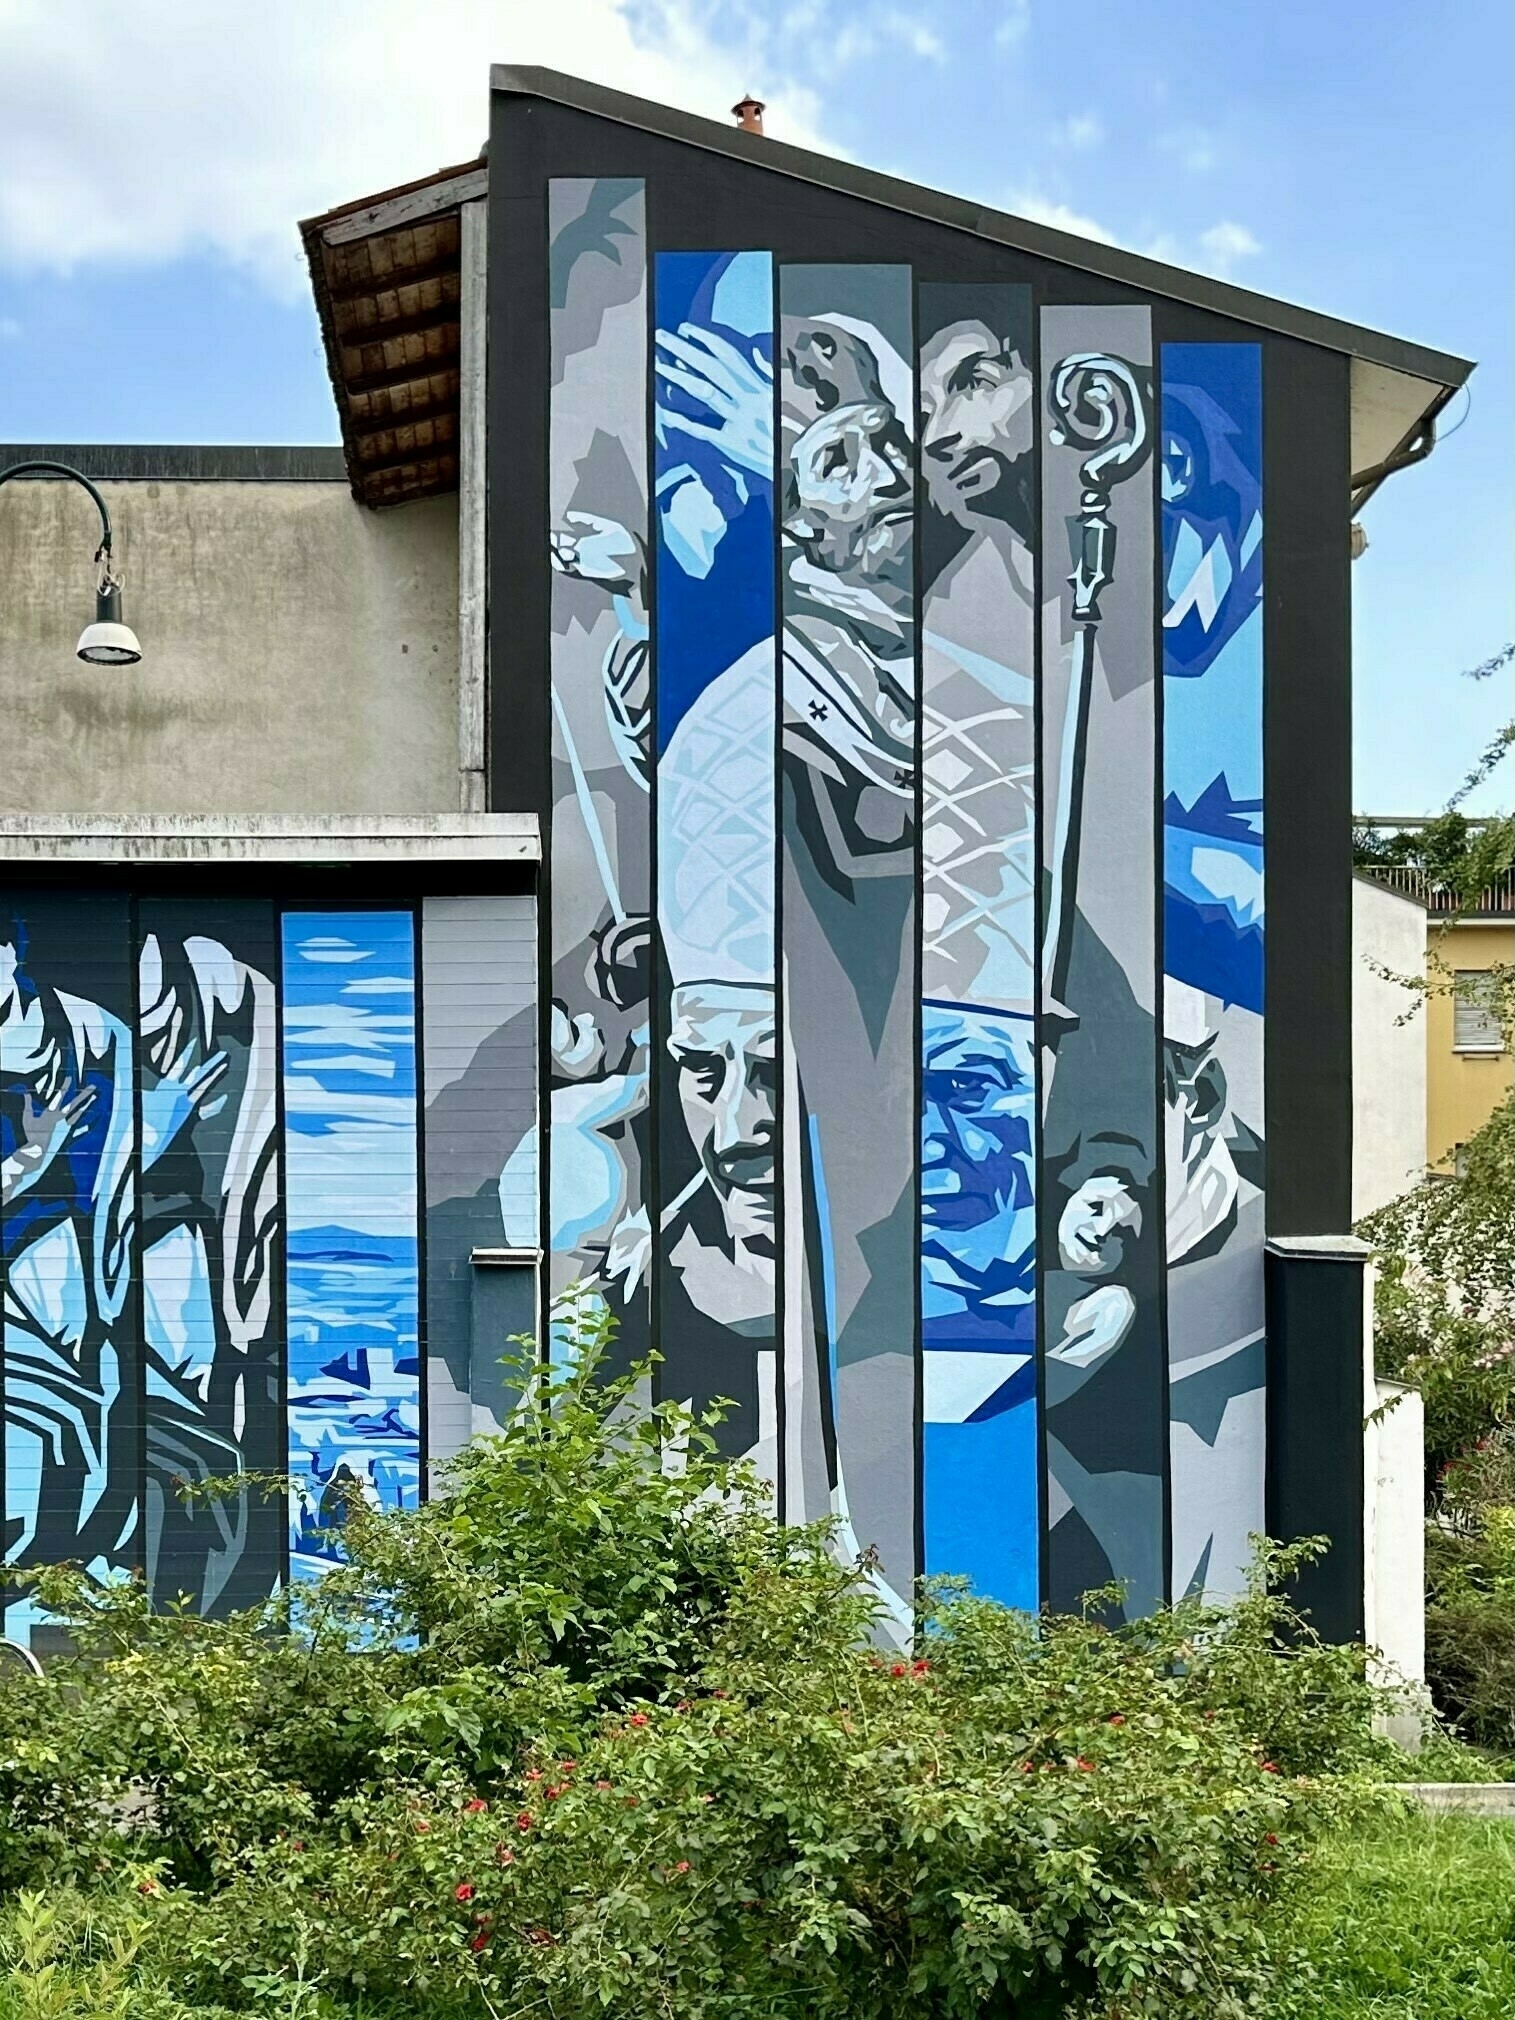 Striped mosaic of religious-subject murals in blue and grey on the side of a building